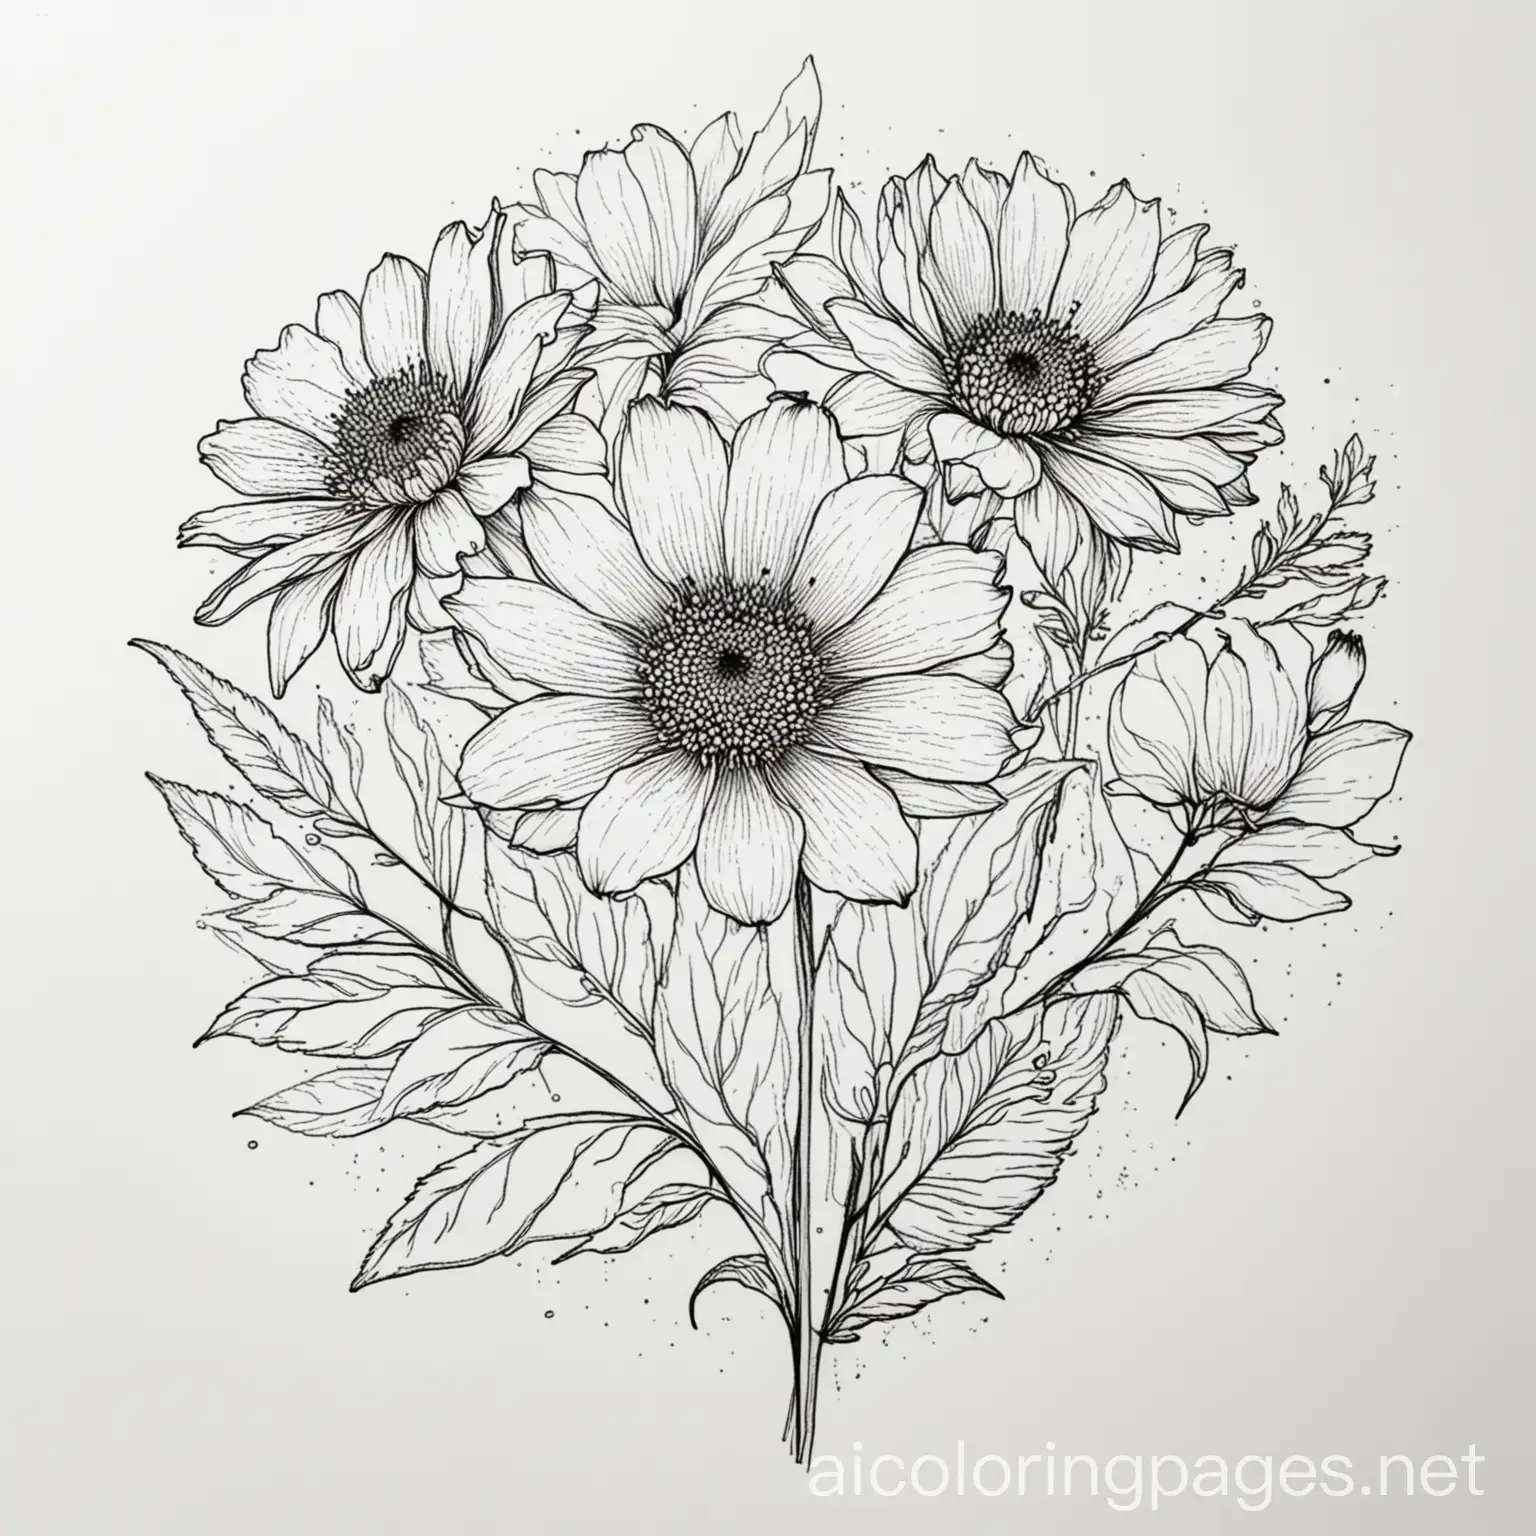 COLORING IMAGE OF FLOWERS, Coloring Page, black and white, line art, white background, Simplicity, Ample White Space